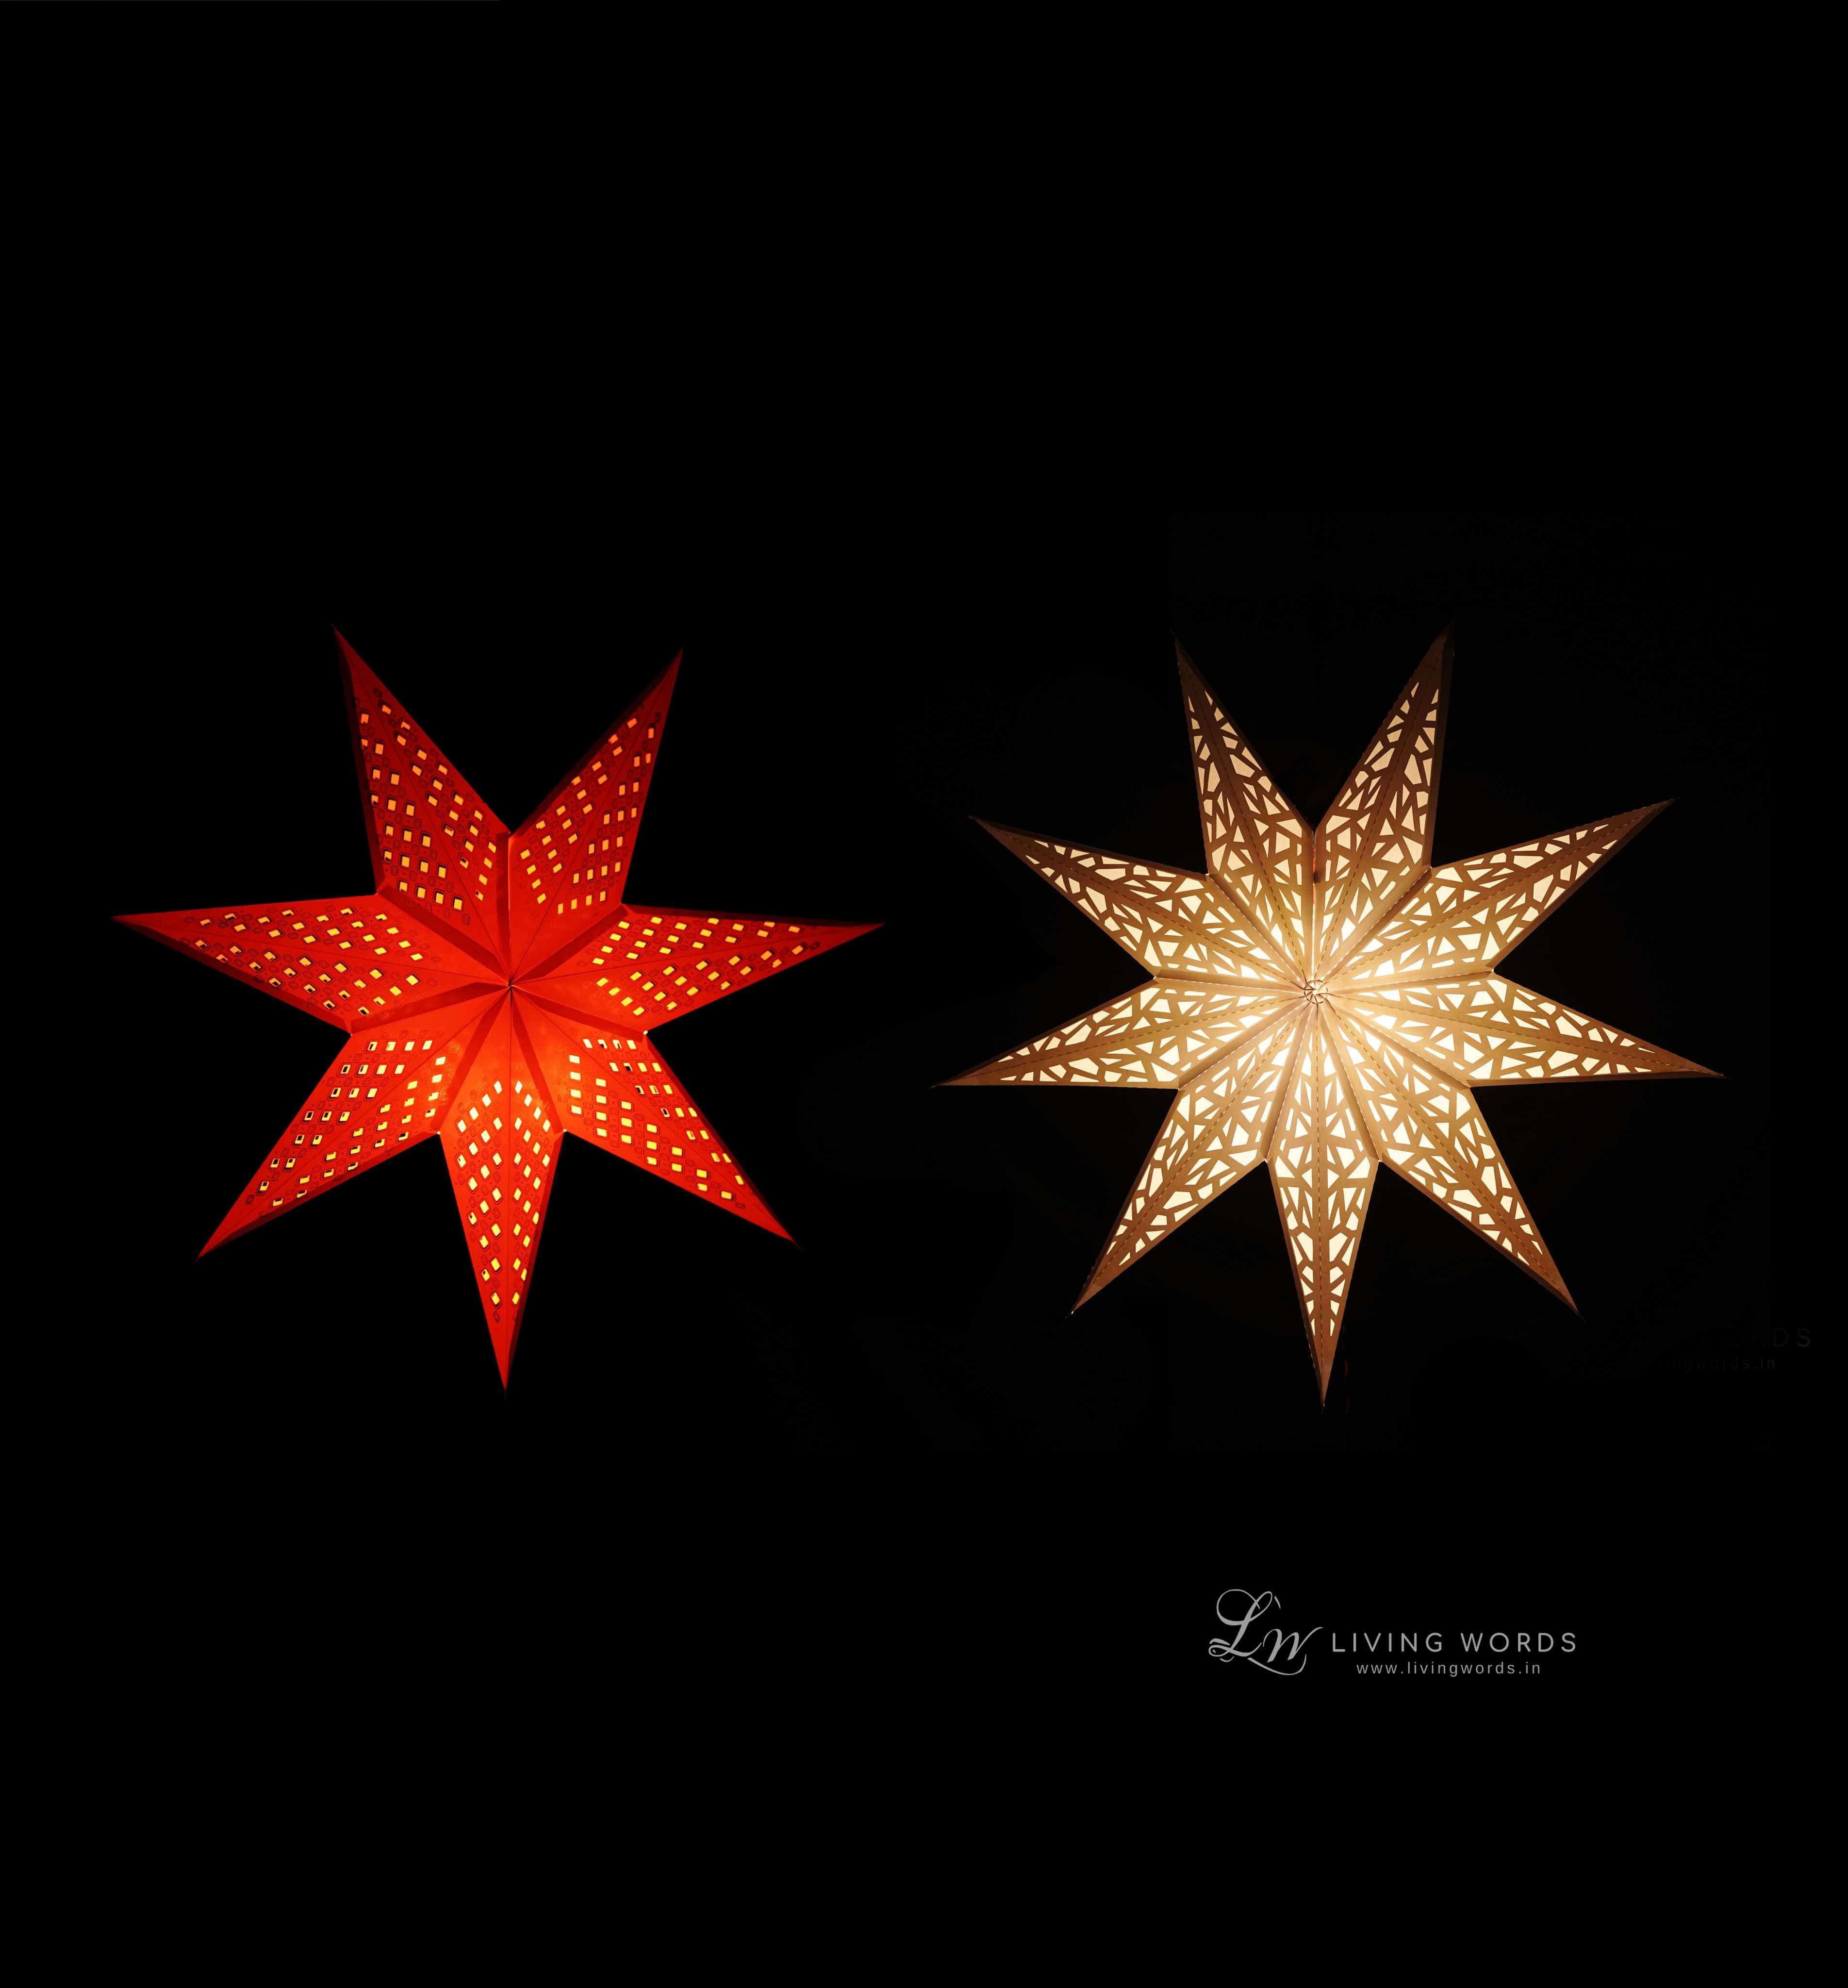 AStar Combo of Two Christmas Paper Star Lanterns (Red and White)